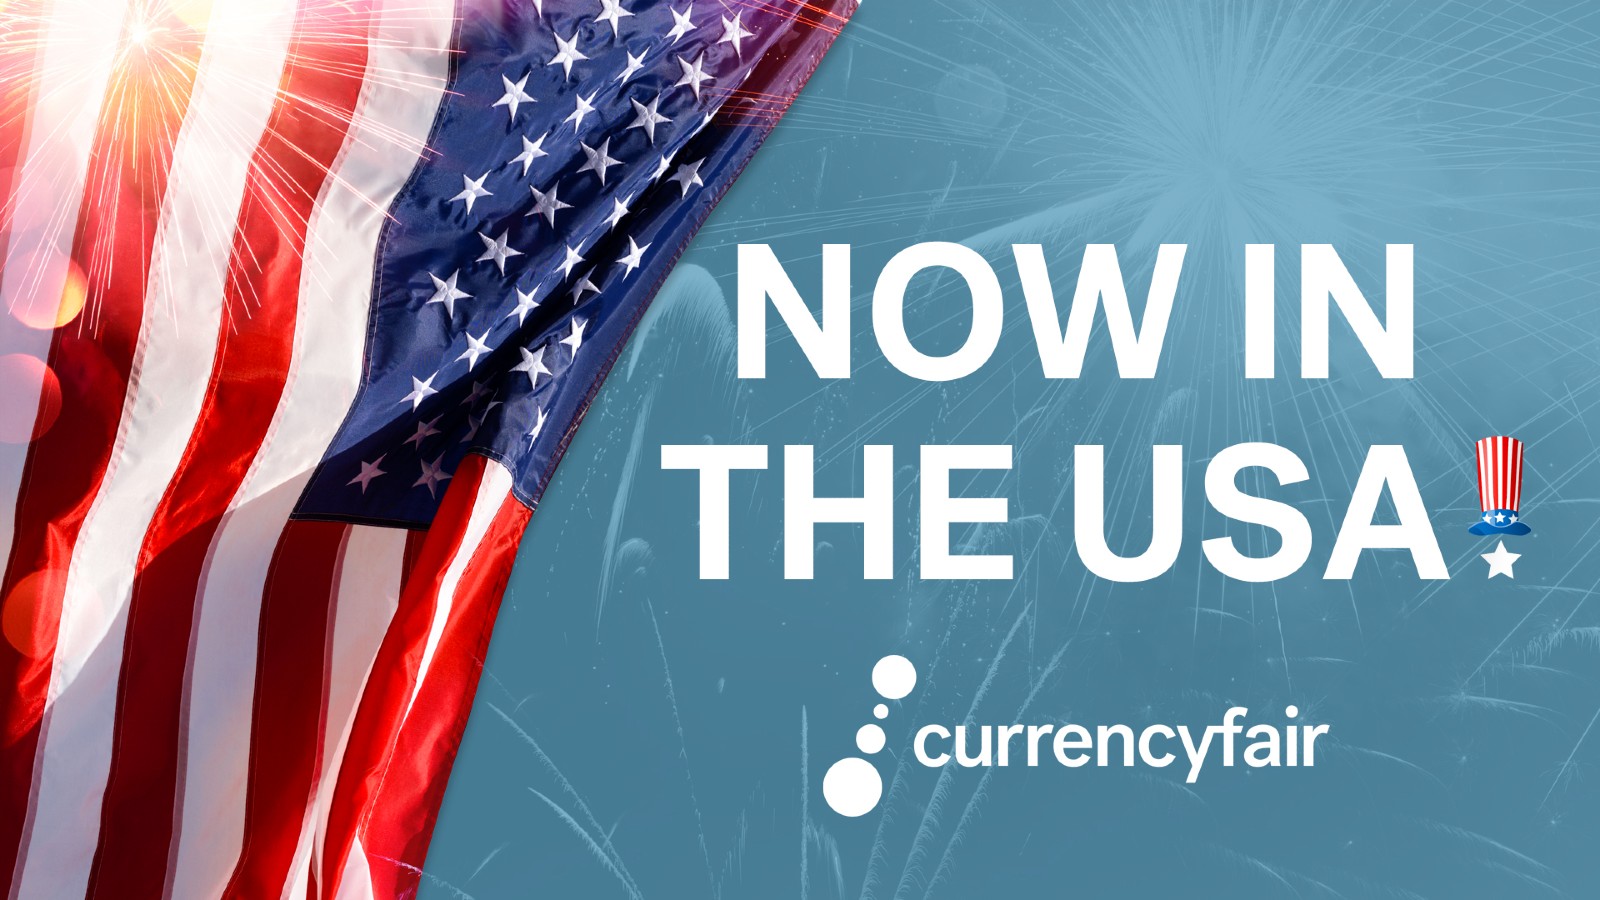 CurrencyFair has launched in the USA